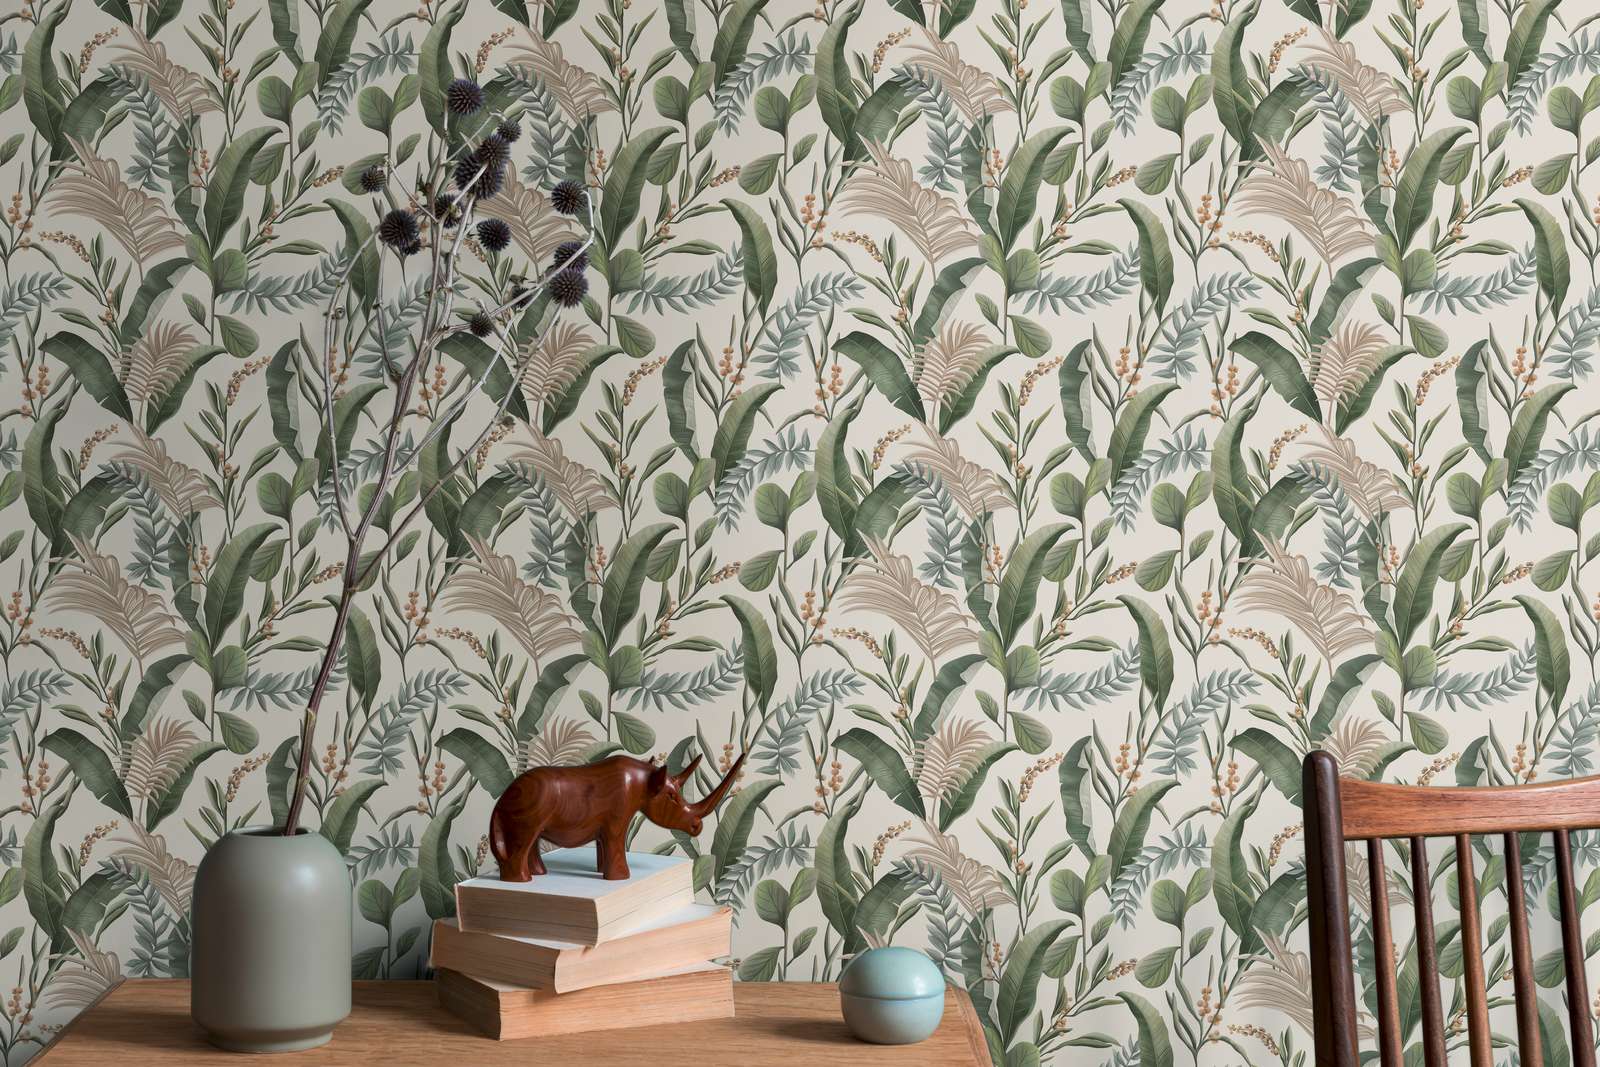             Floral wallpaper with leaves in jungle style textured matt - cream, green, beige
        